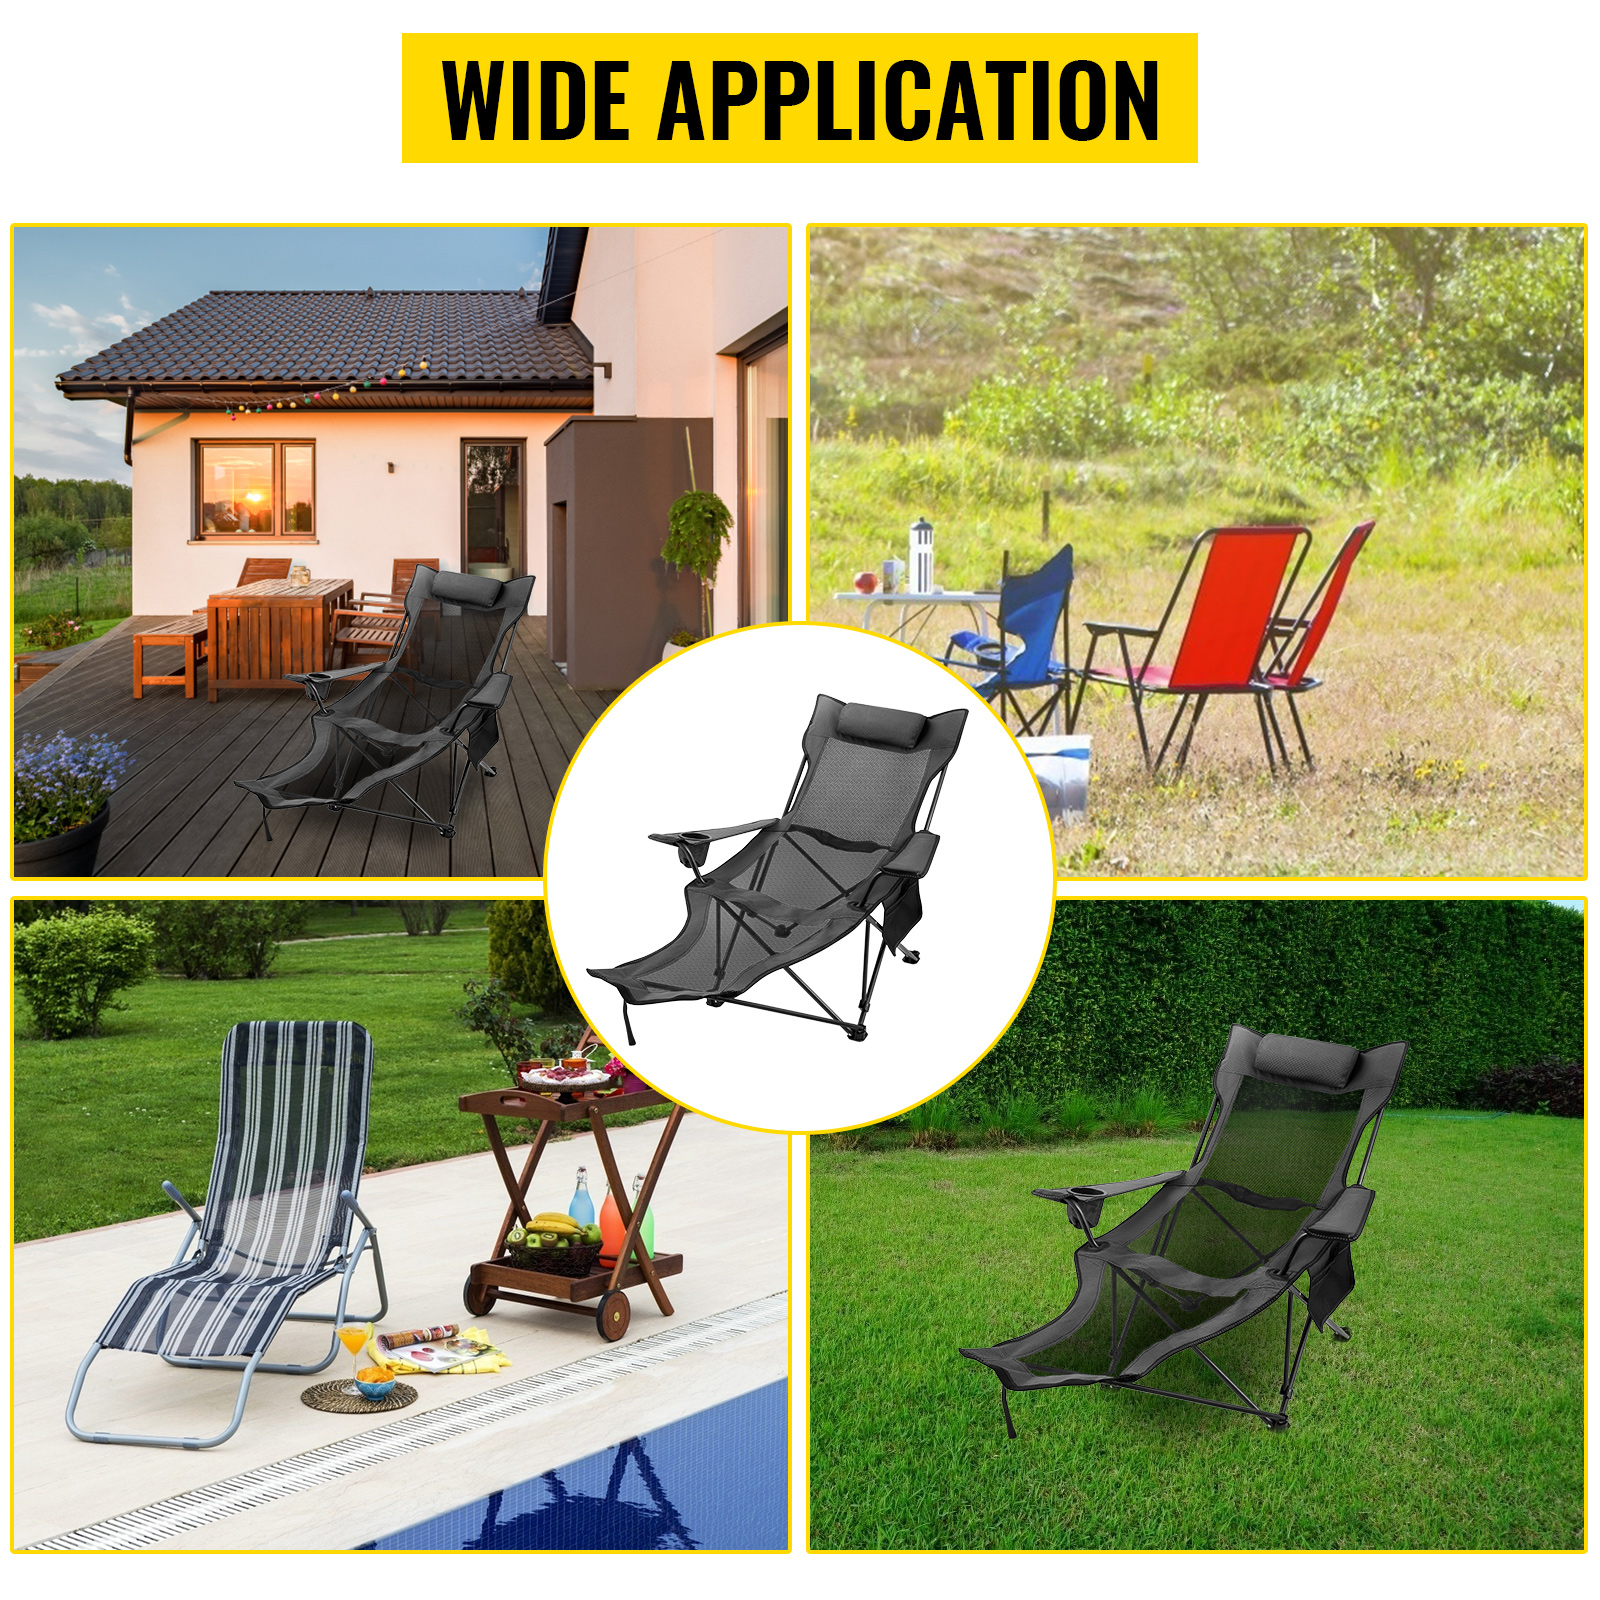 VEVOR Folding Camp Chair with Footrest Mesh Portable Lounge Chair with Cup Holder & Storage Bag - Grey